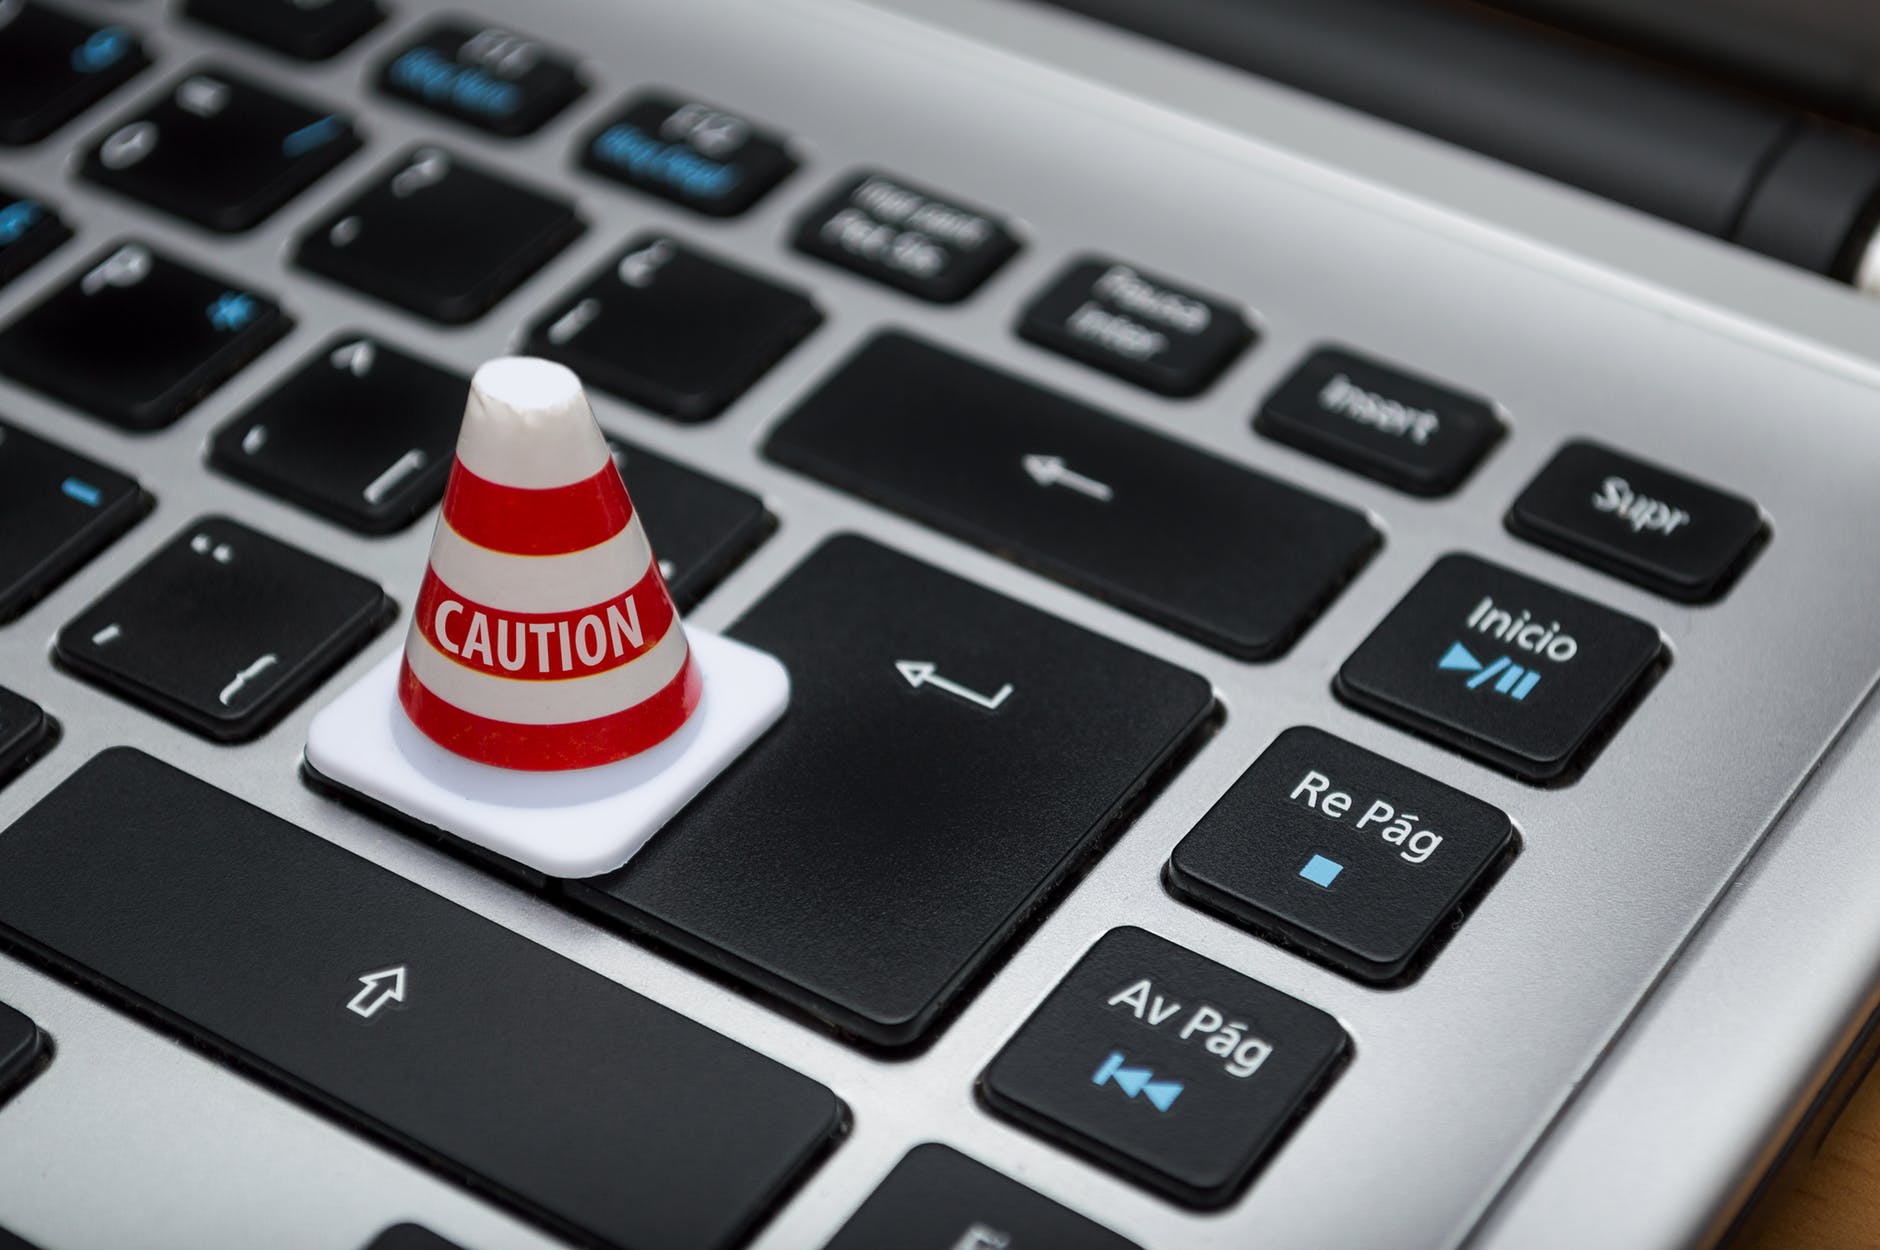 Mini traffic cone with the word 'caution' on it sitting on the enter key on a laptop keyboard